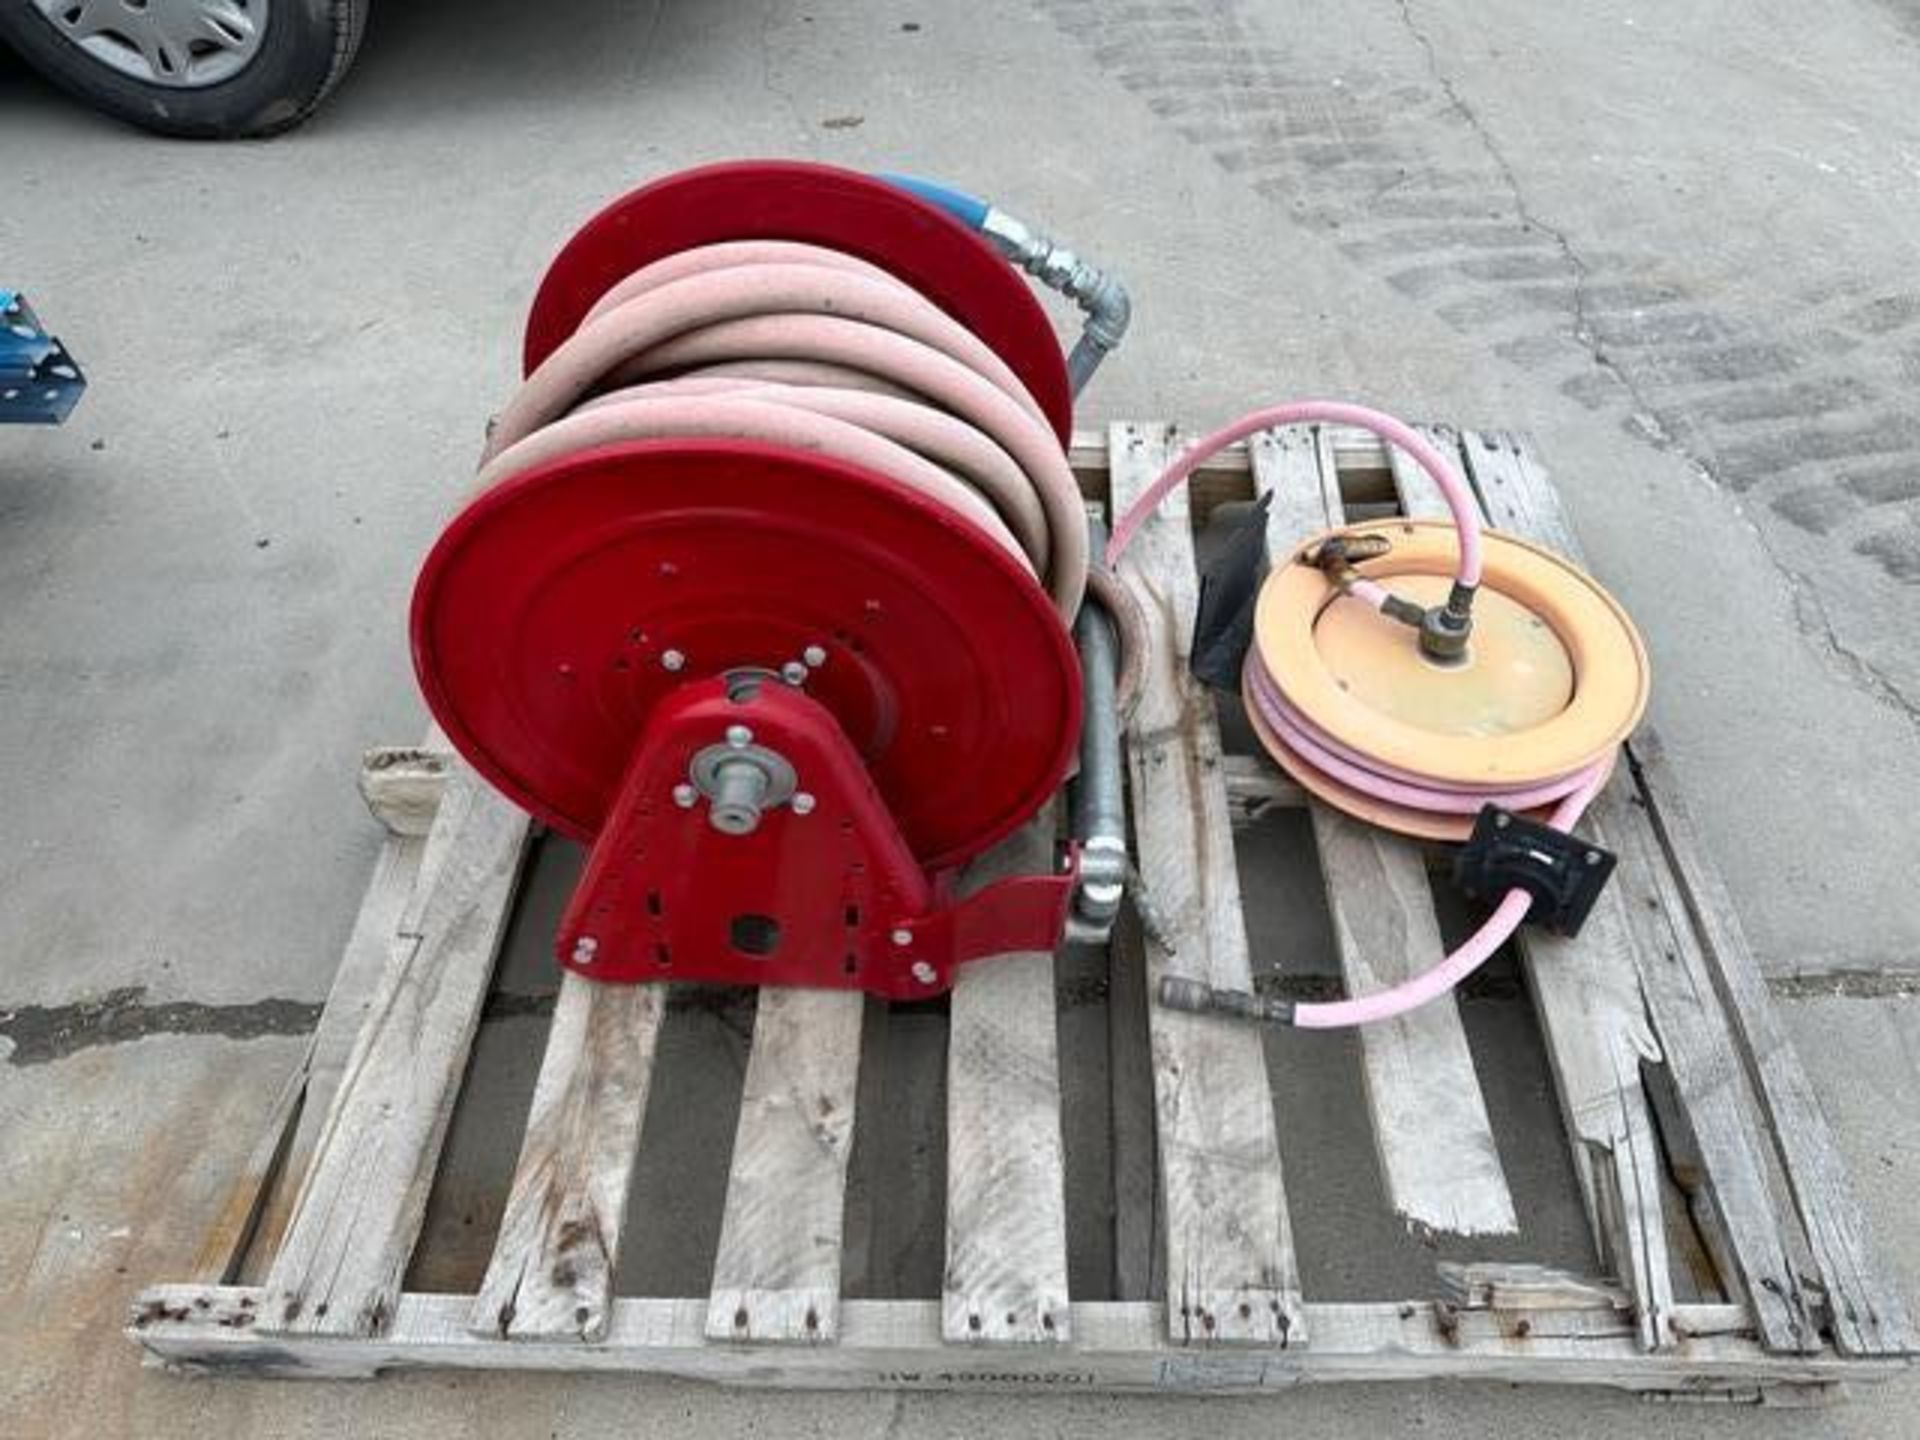 Reelcraft Motor Driven Hose Reel Heavy Duty 3/4" Hose 12v and an auto Rewind hose reel with 1/2" hos - Image 2 of 8